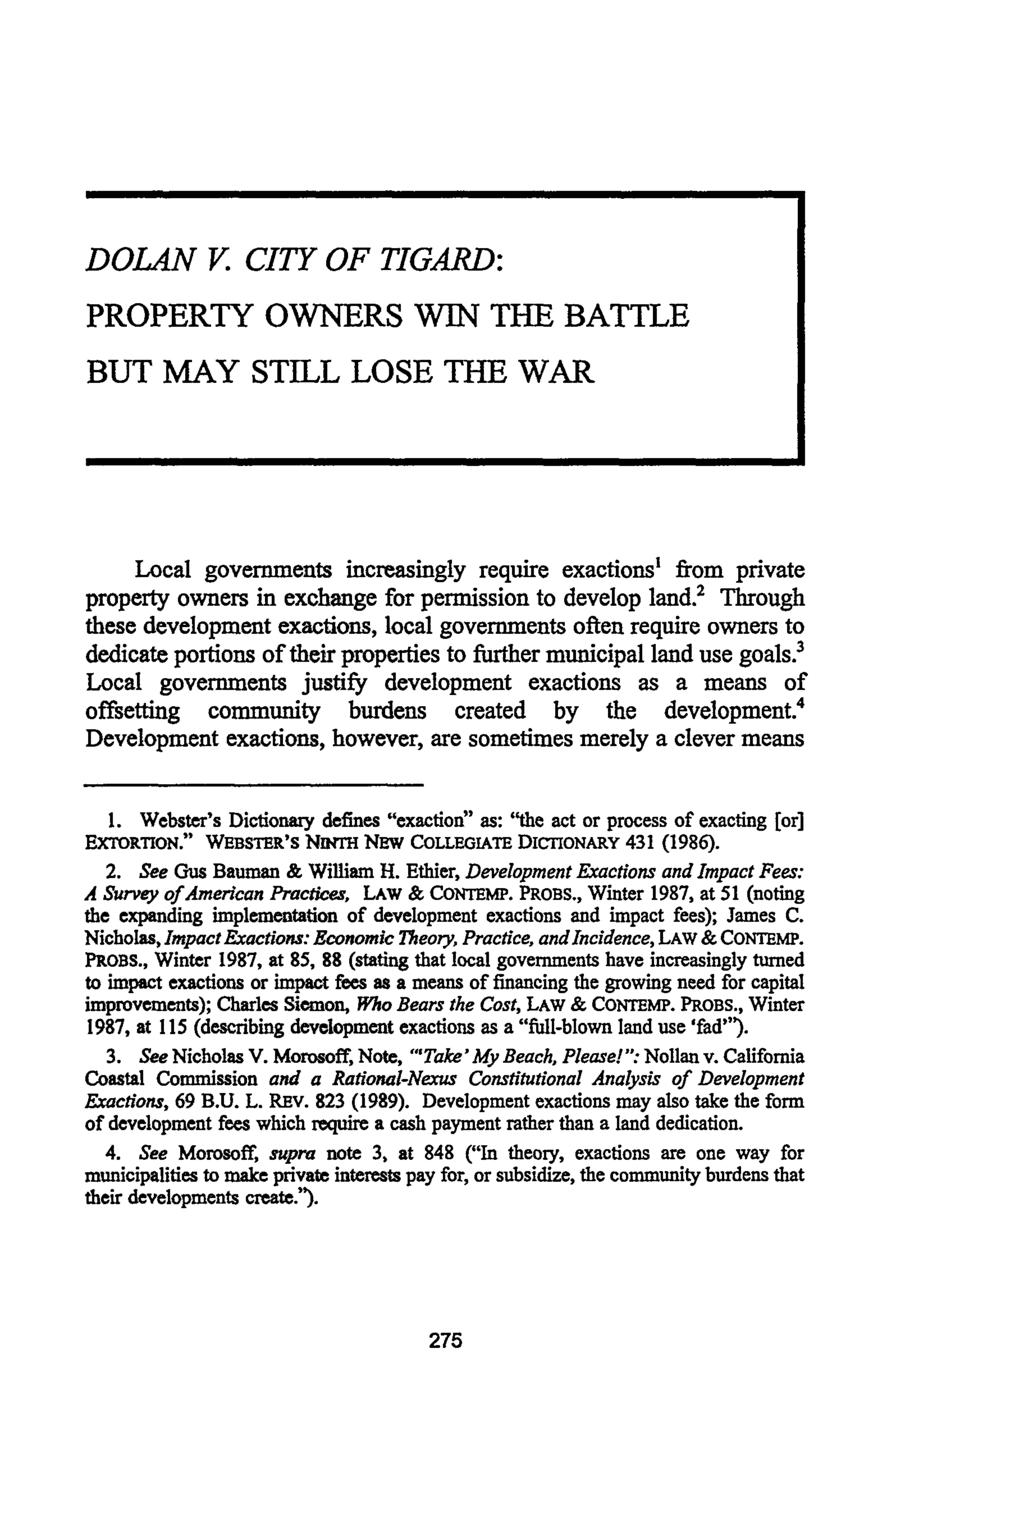 DOLAN V CITY OF TIGARD: PROPERTY OWNERS WIN THE BATTLE BUT MAY STILL LOSE THE WAR Local governments increasingly require exactions' from private property owners in exchange for permission to develop